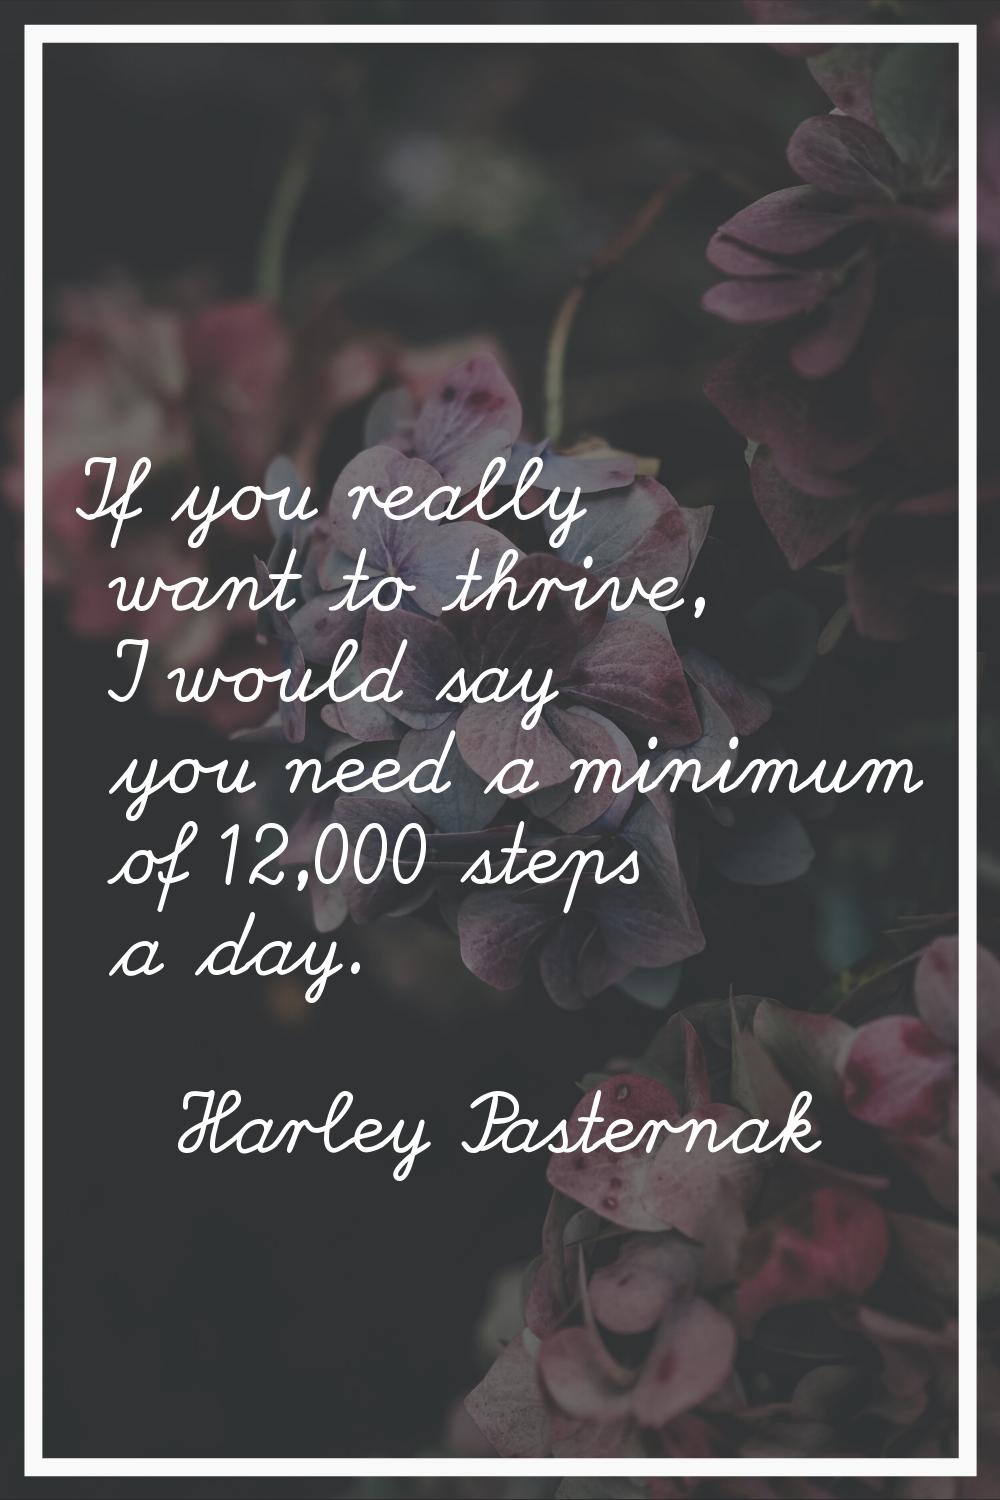 If you really want to thrive, I would say you need a minimum of 12,000 steps a day.